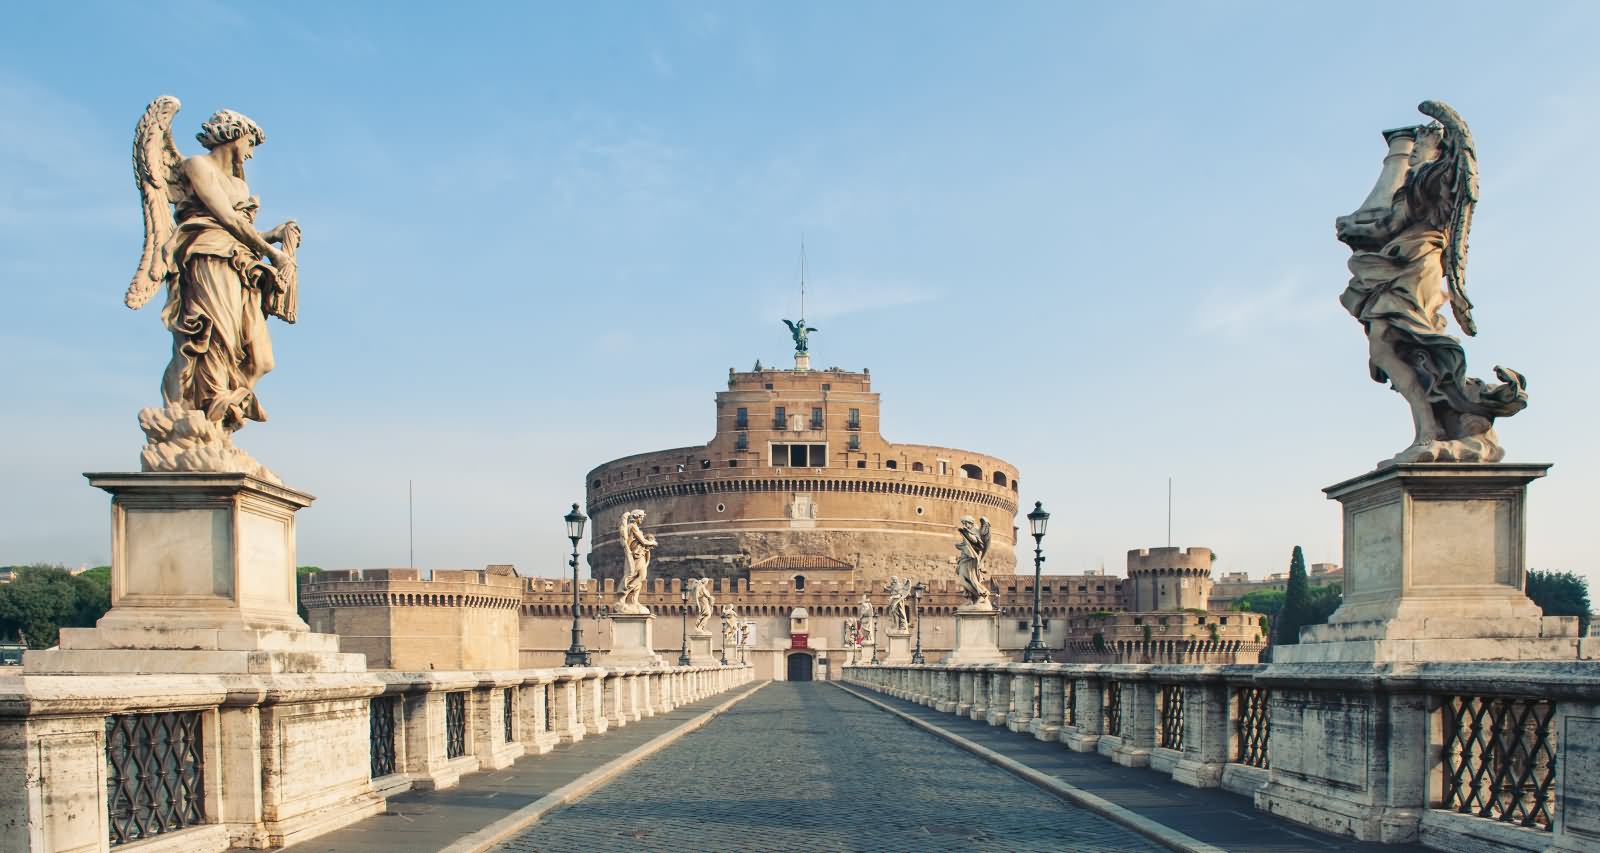 Angel Sculptures On The Way Of Castel Sant'Angelo